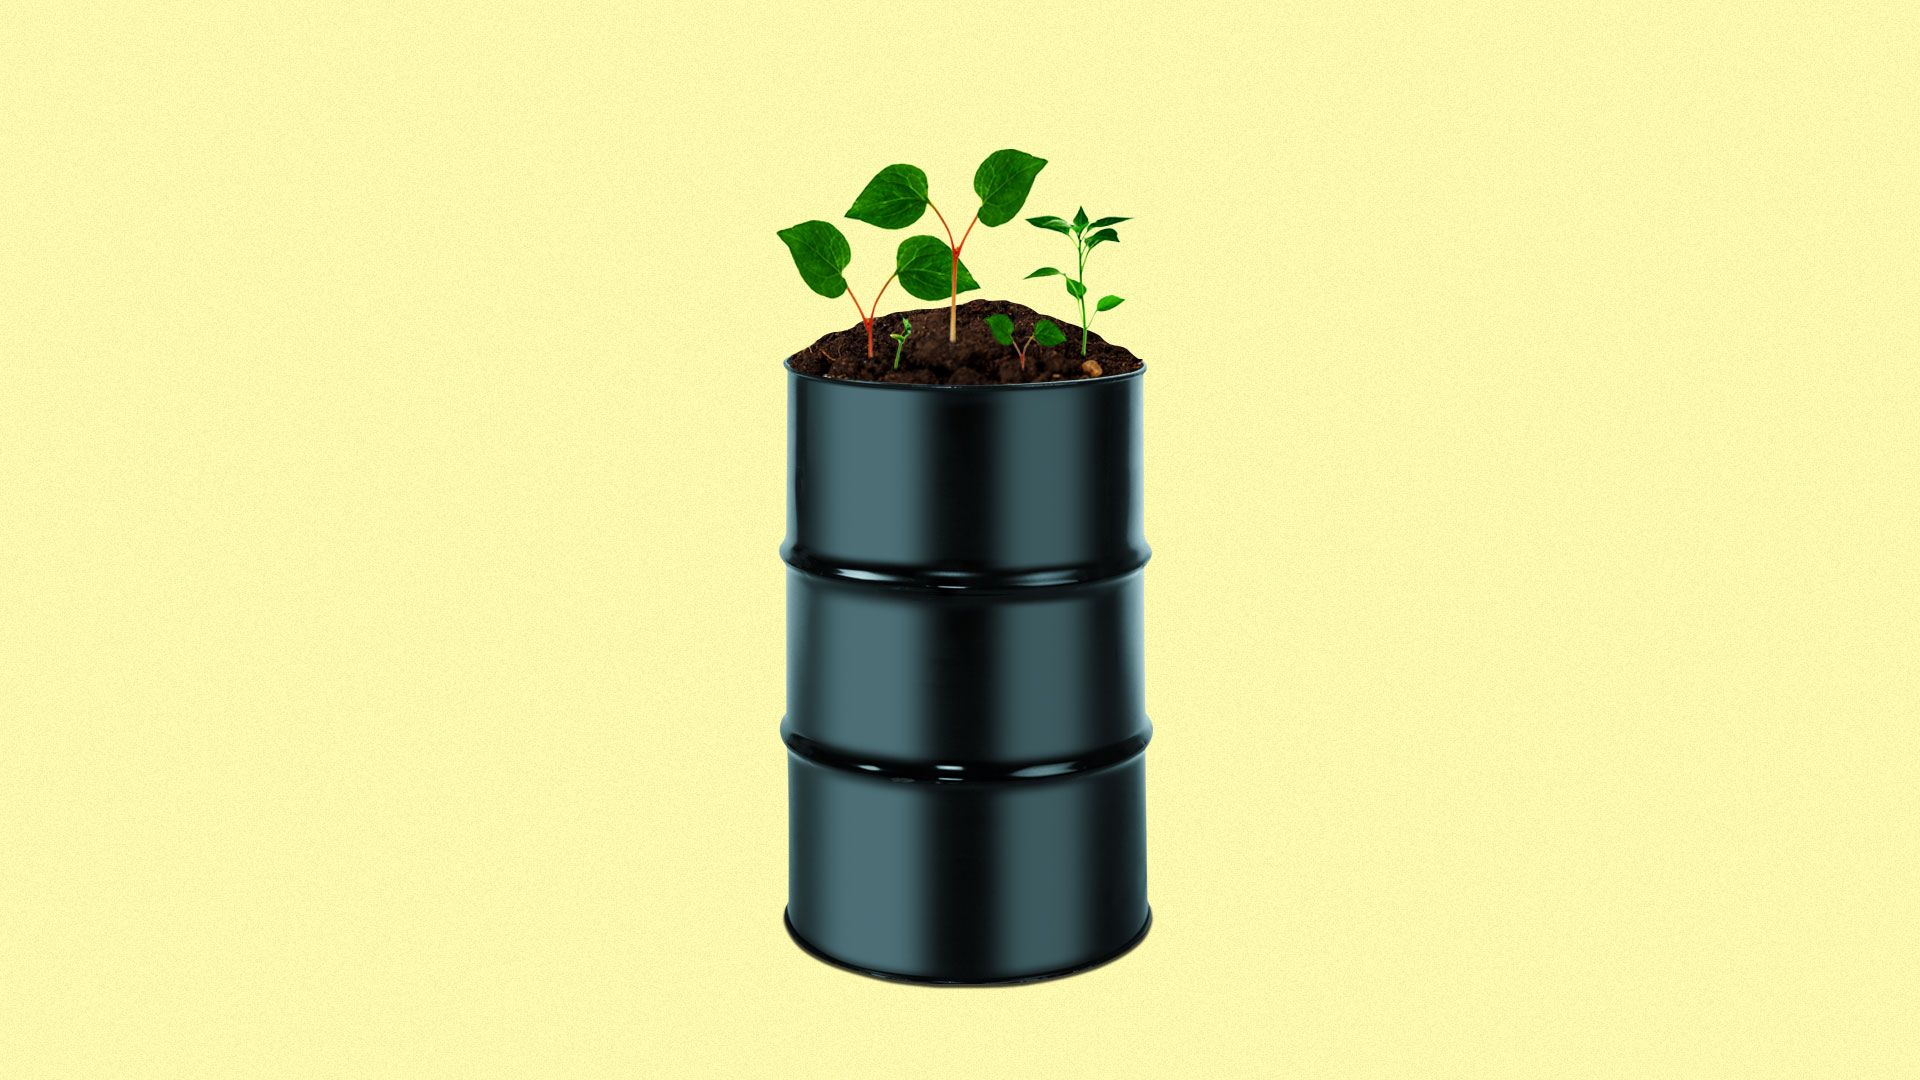 Illustration of oil barrel with plants growing on top of lid.